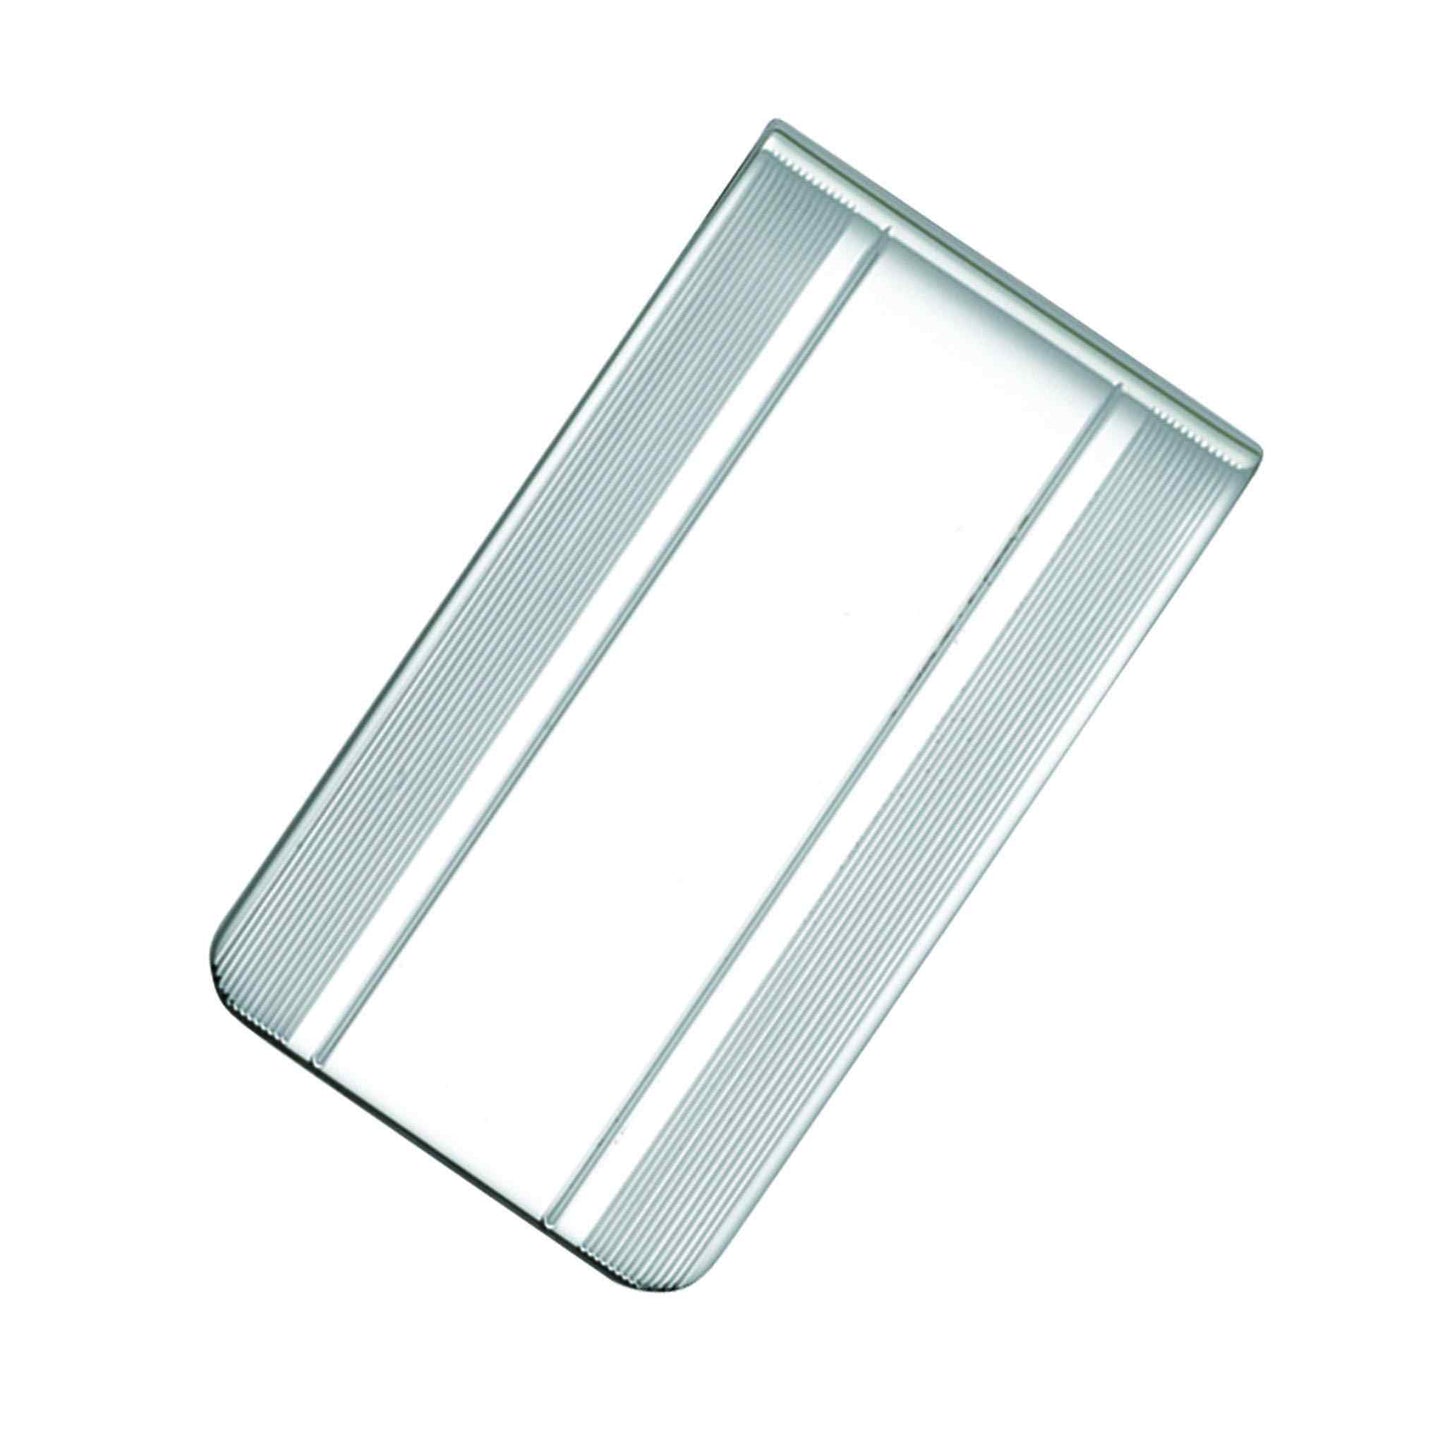 A 1" sterling silver money clip with engine-turned borders displayed on a neutral white background.